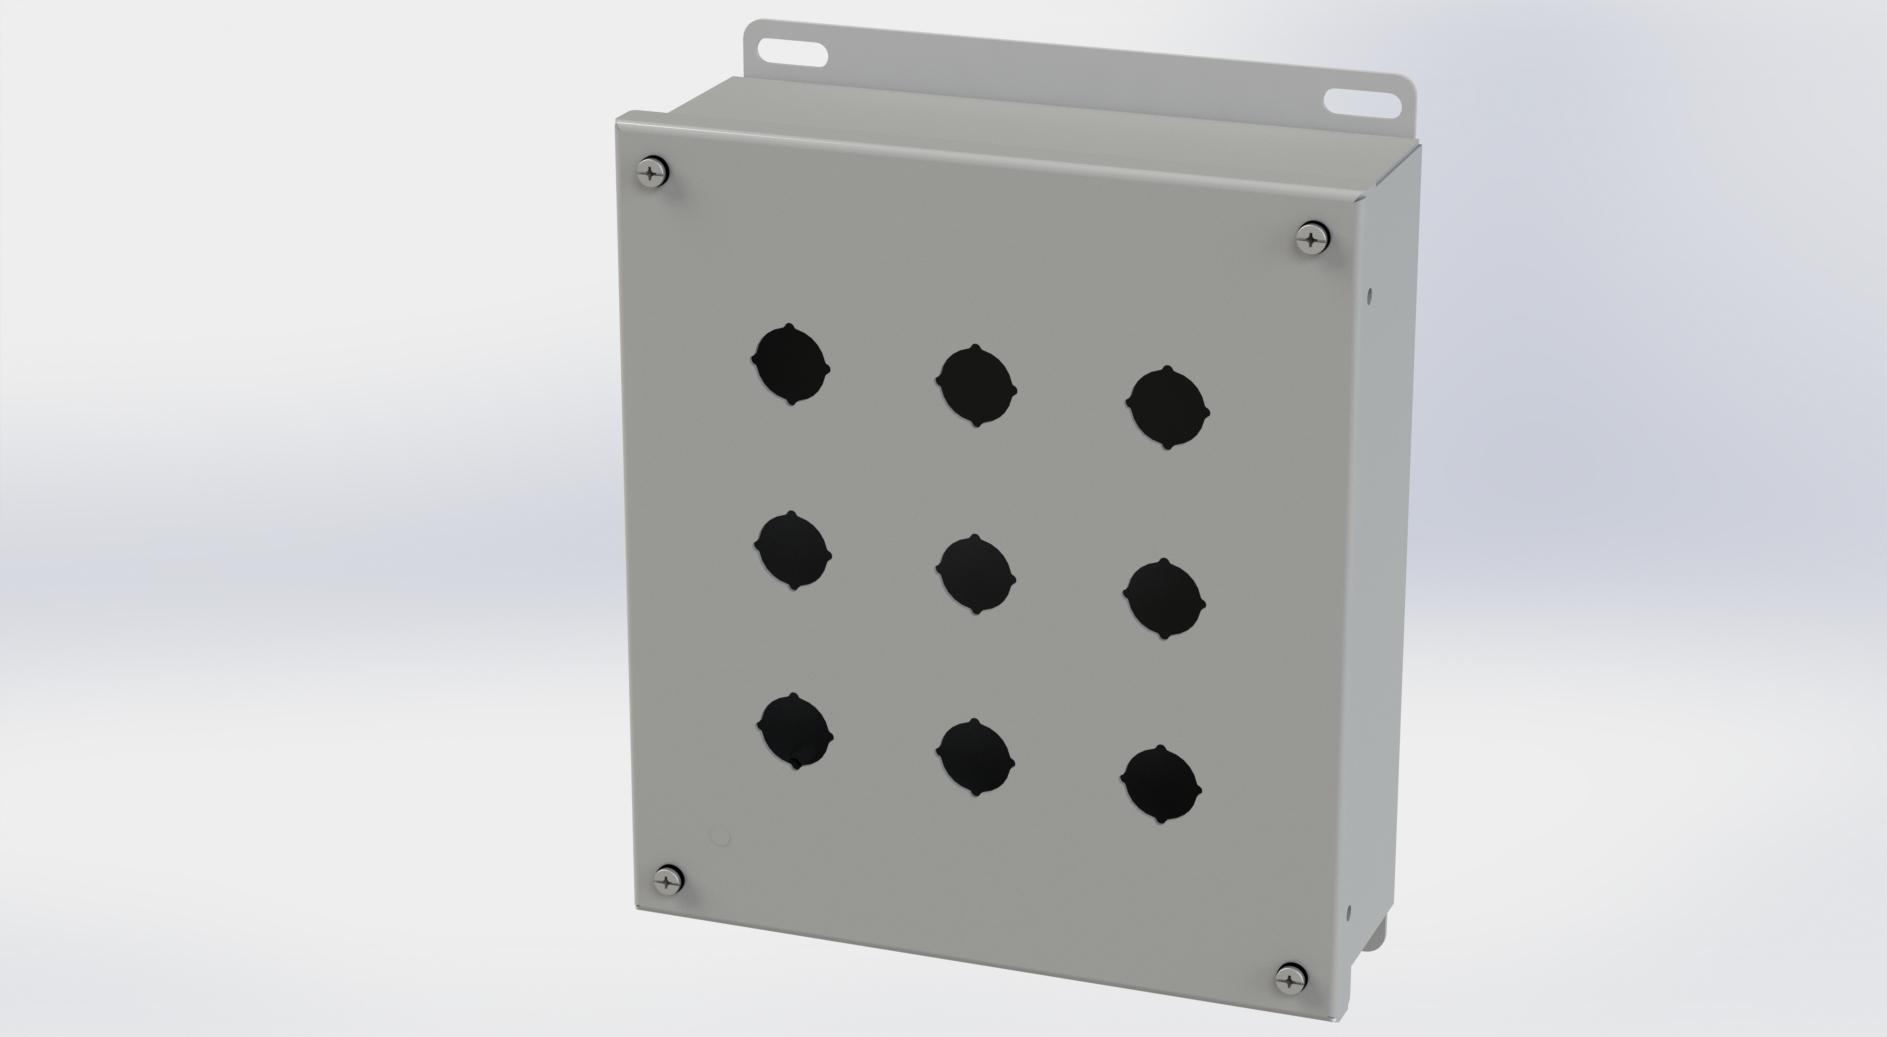 Saginaw Control SCE-9PBI PB Enclosure, Height:9.50", Width:8.50", Depth:3.00", ANSI-61 gray powder coat inside and out. 